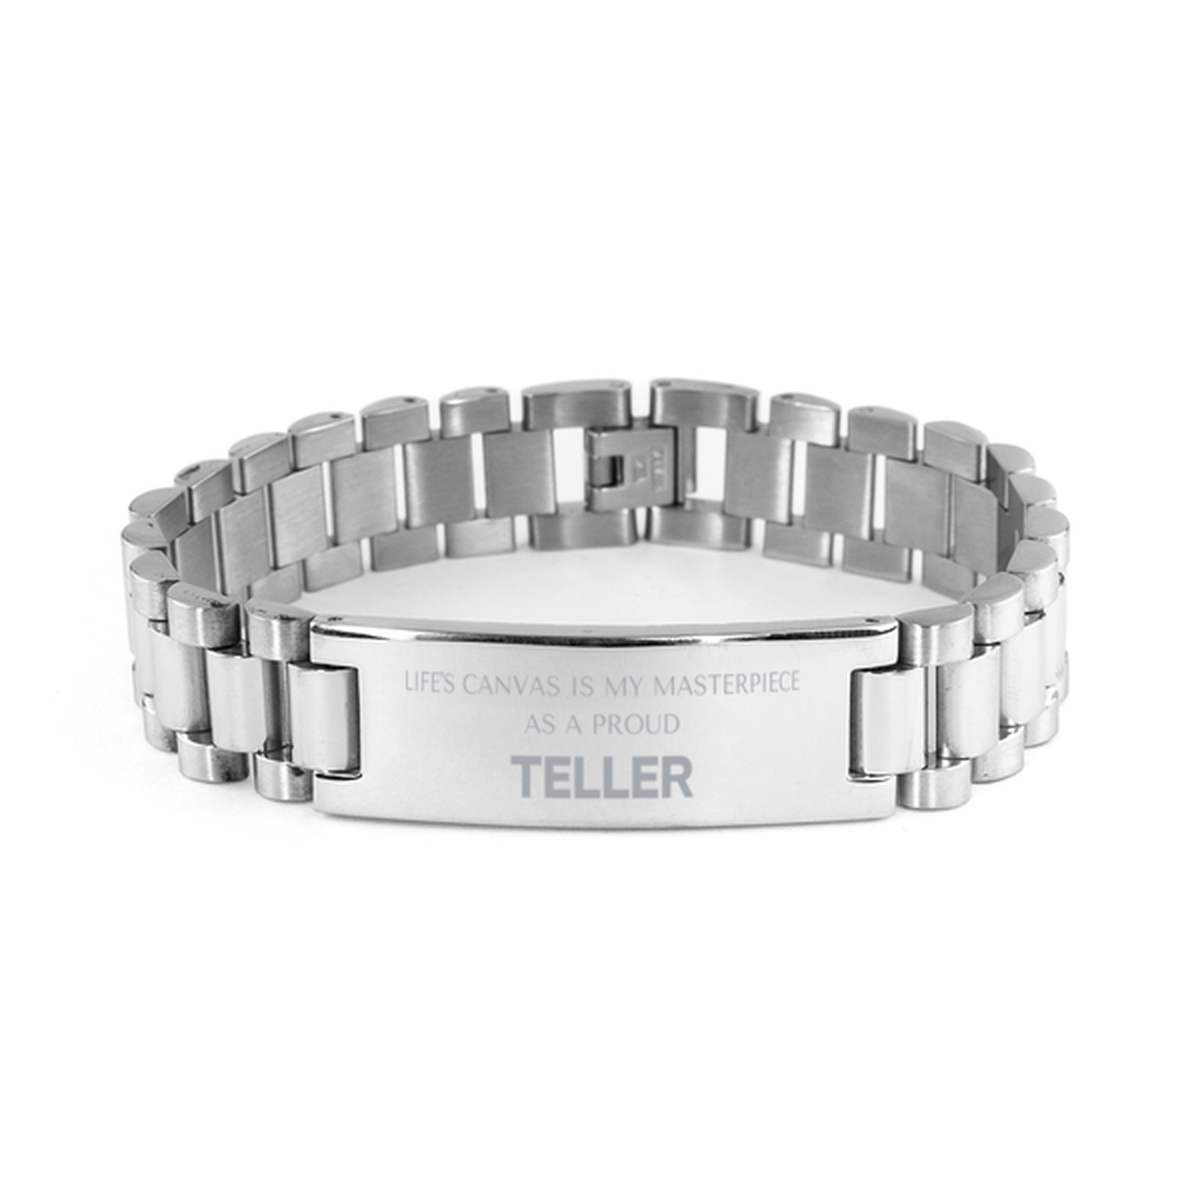 Proud Teller Gifts, Life's canvas is my masterpiece, Epic Birthday Christmas Unique Ladder Stainless Steel Bracelet For Teller, Coworkers, Men, Women, Friends